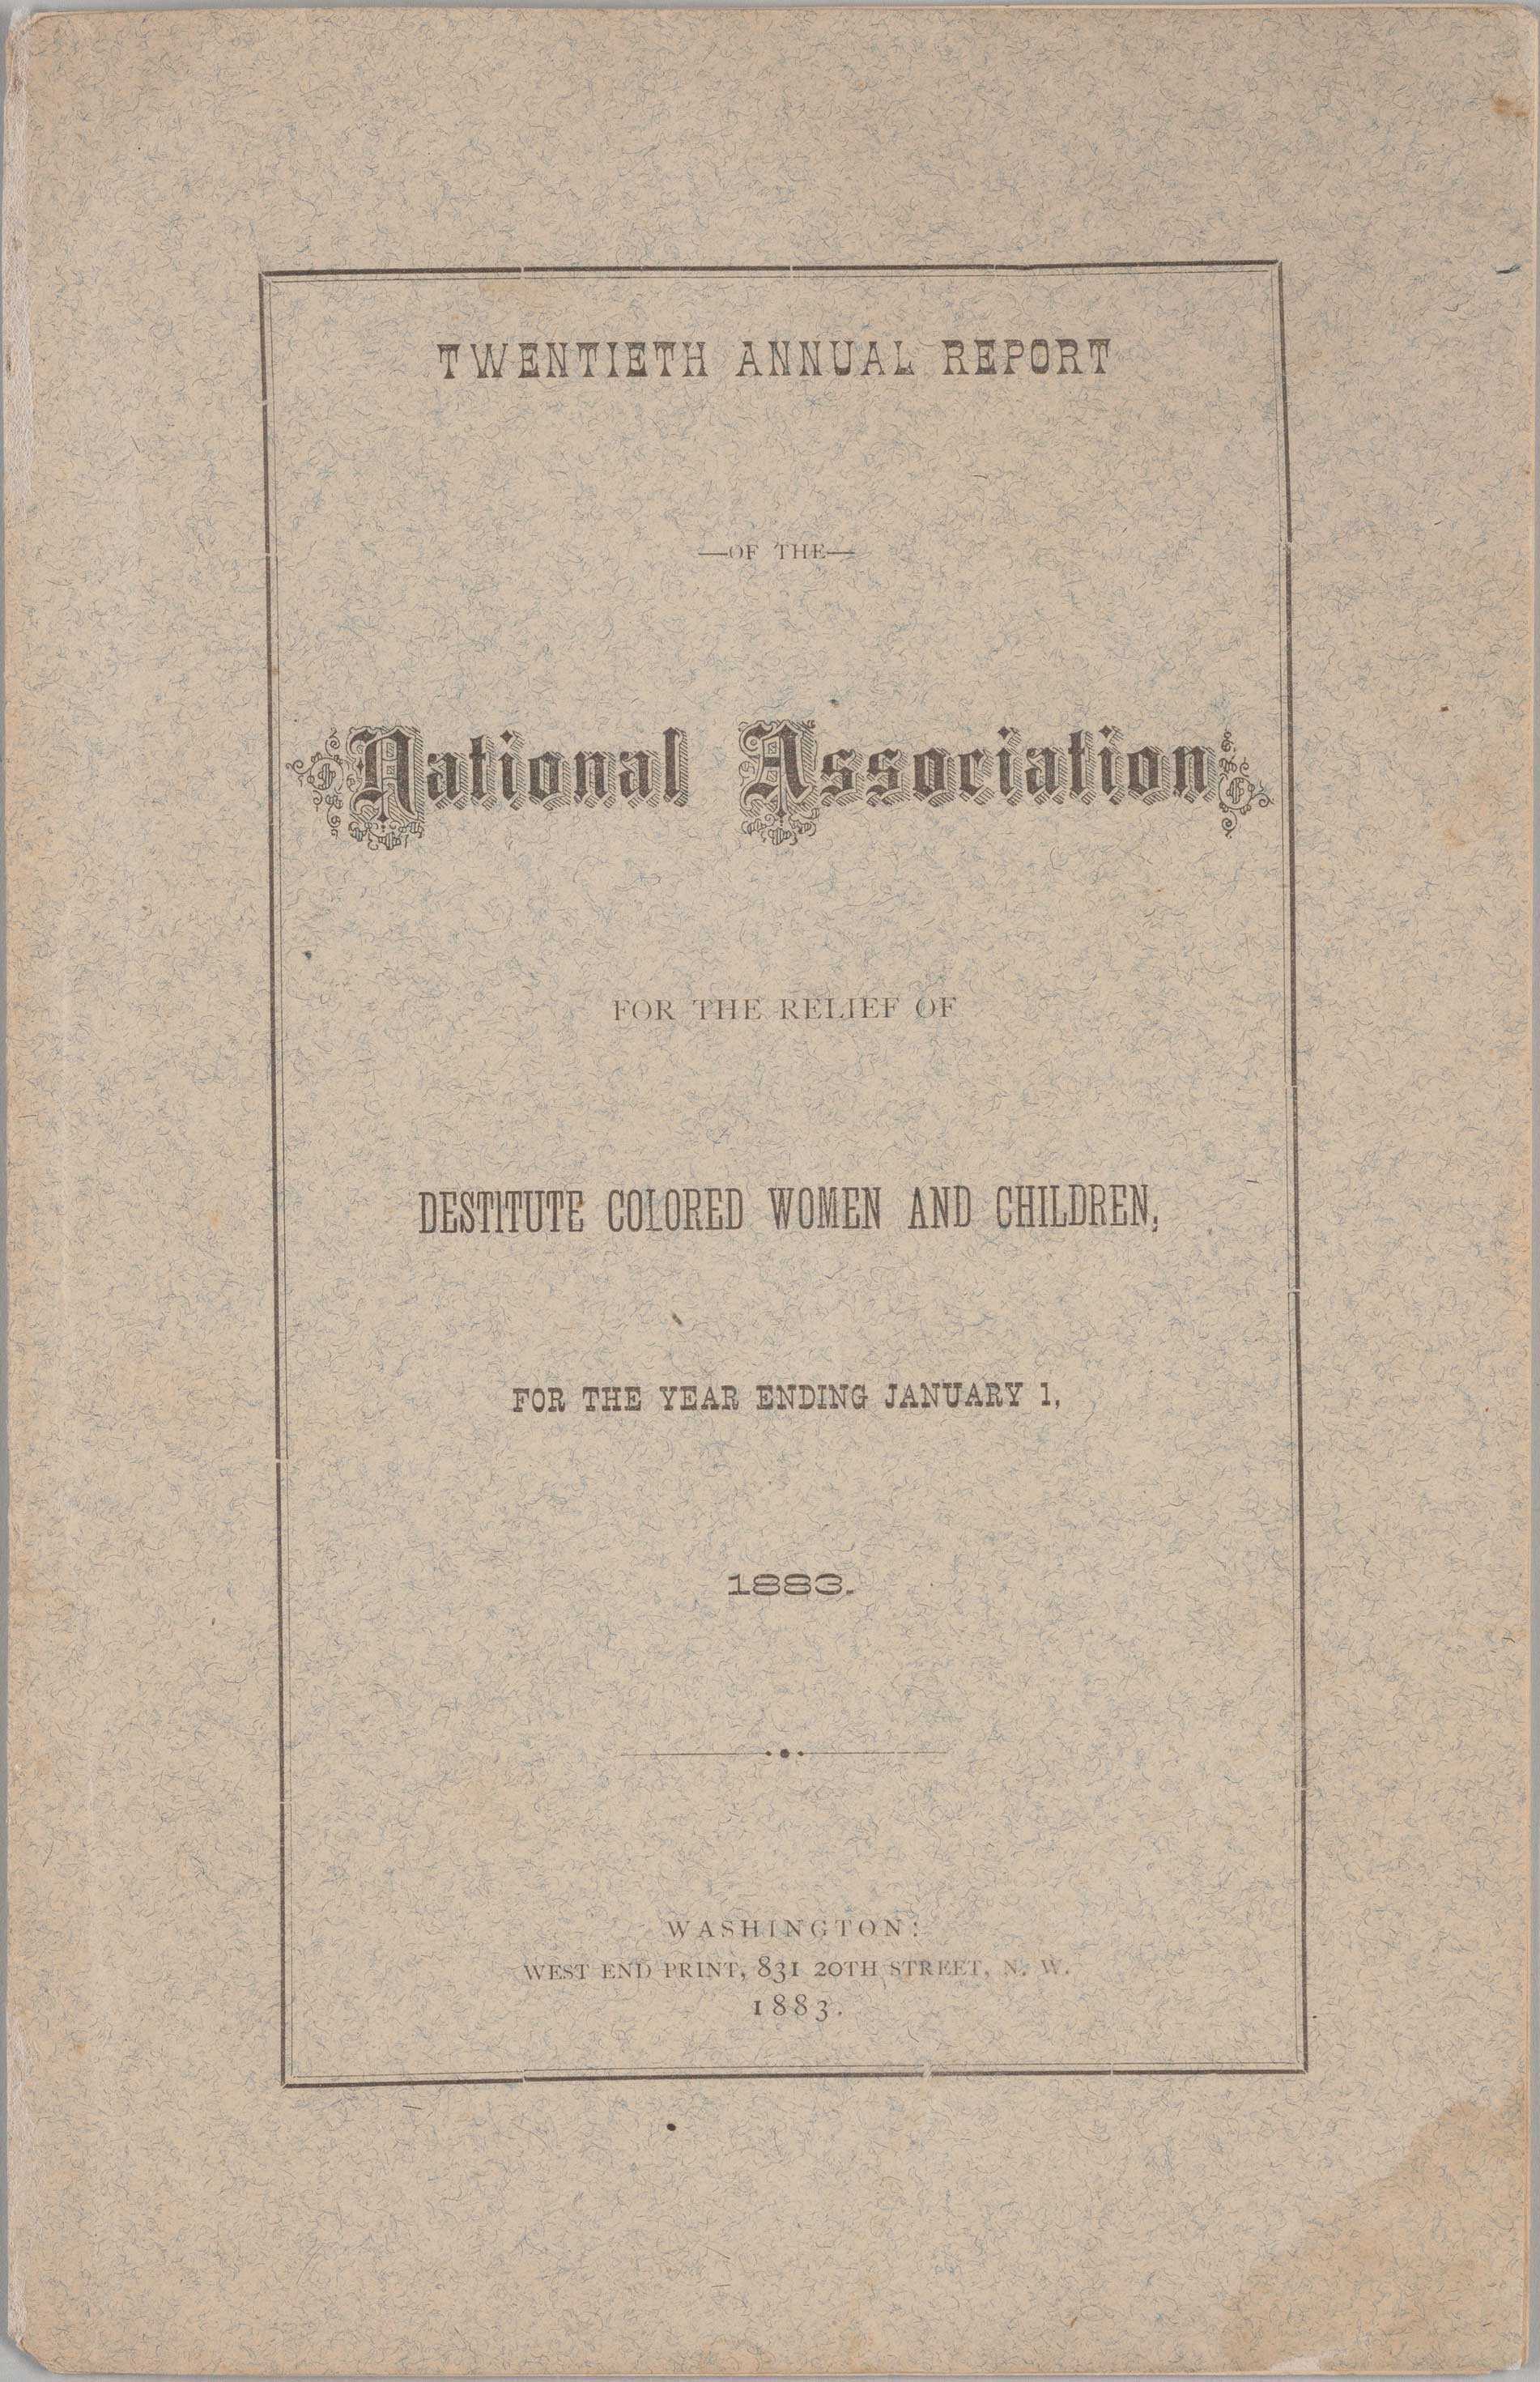 The cover of Twentieth Annual Report of the National Association for the Relief of Destitute Colored Women and Children.